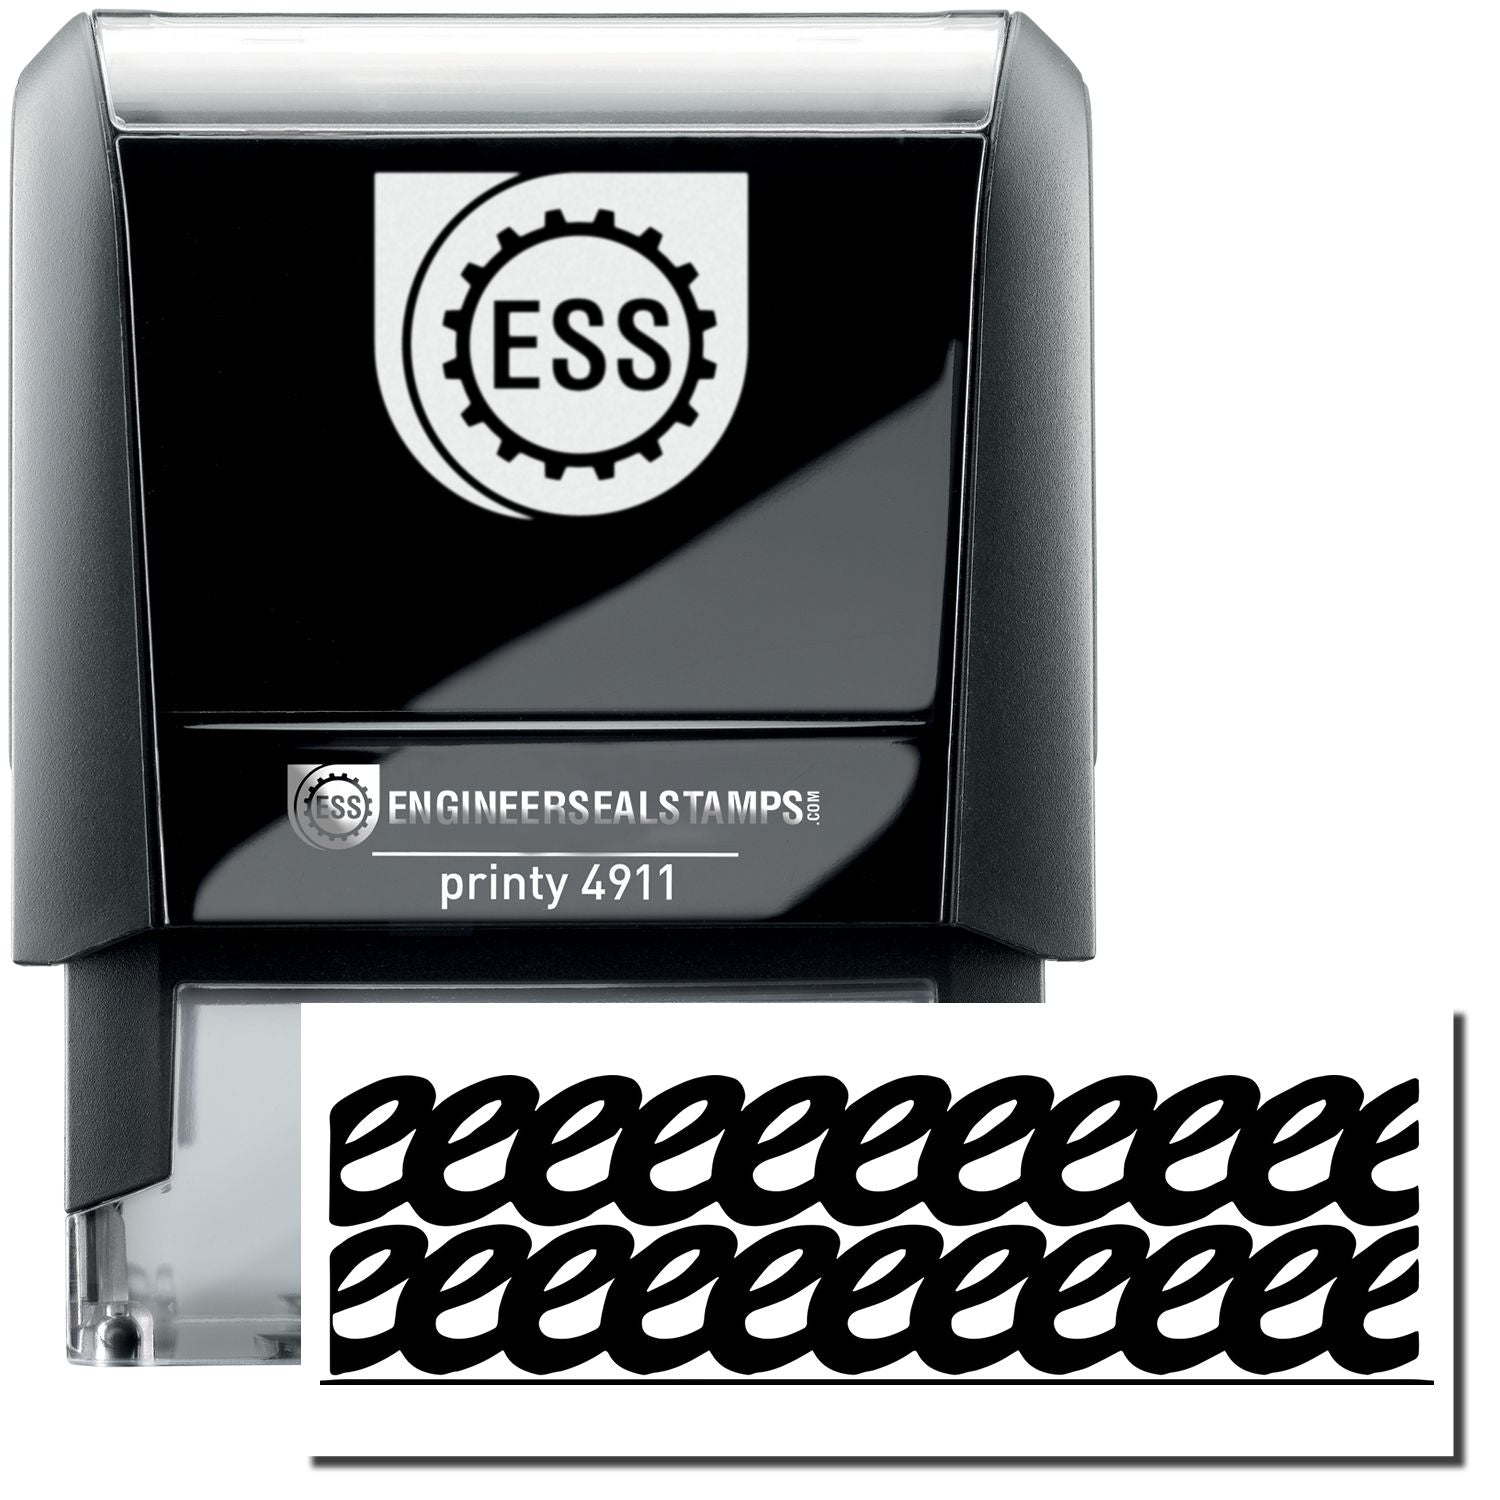 A self-inking stamp with a stamped image showing how a curly design image from this Strikeout stamp will easily remove all evidence of what is behind it.